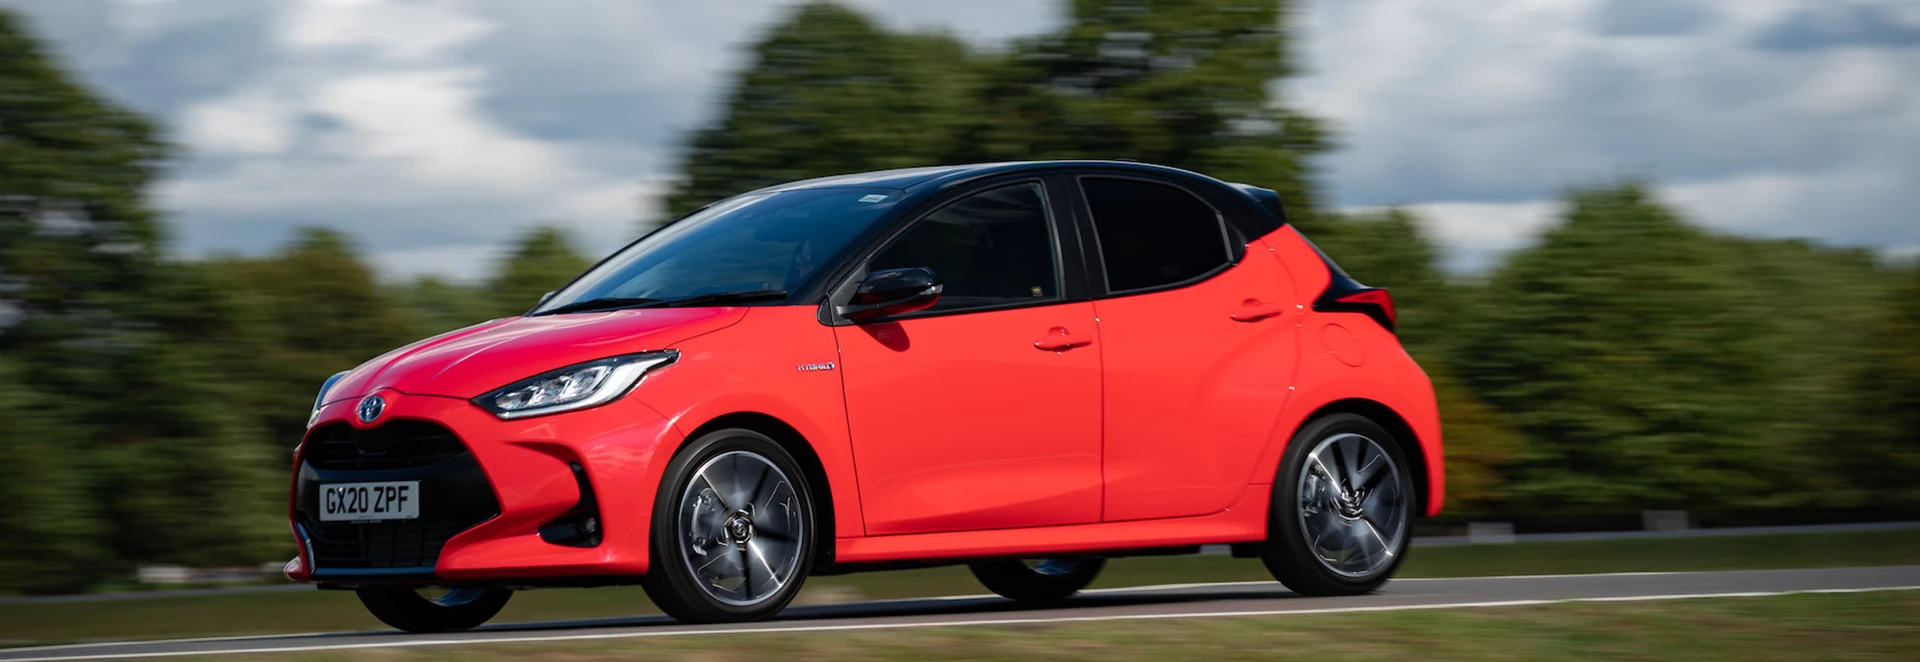 New Toyota Yaris named European Car of the Year 